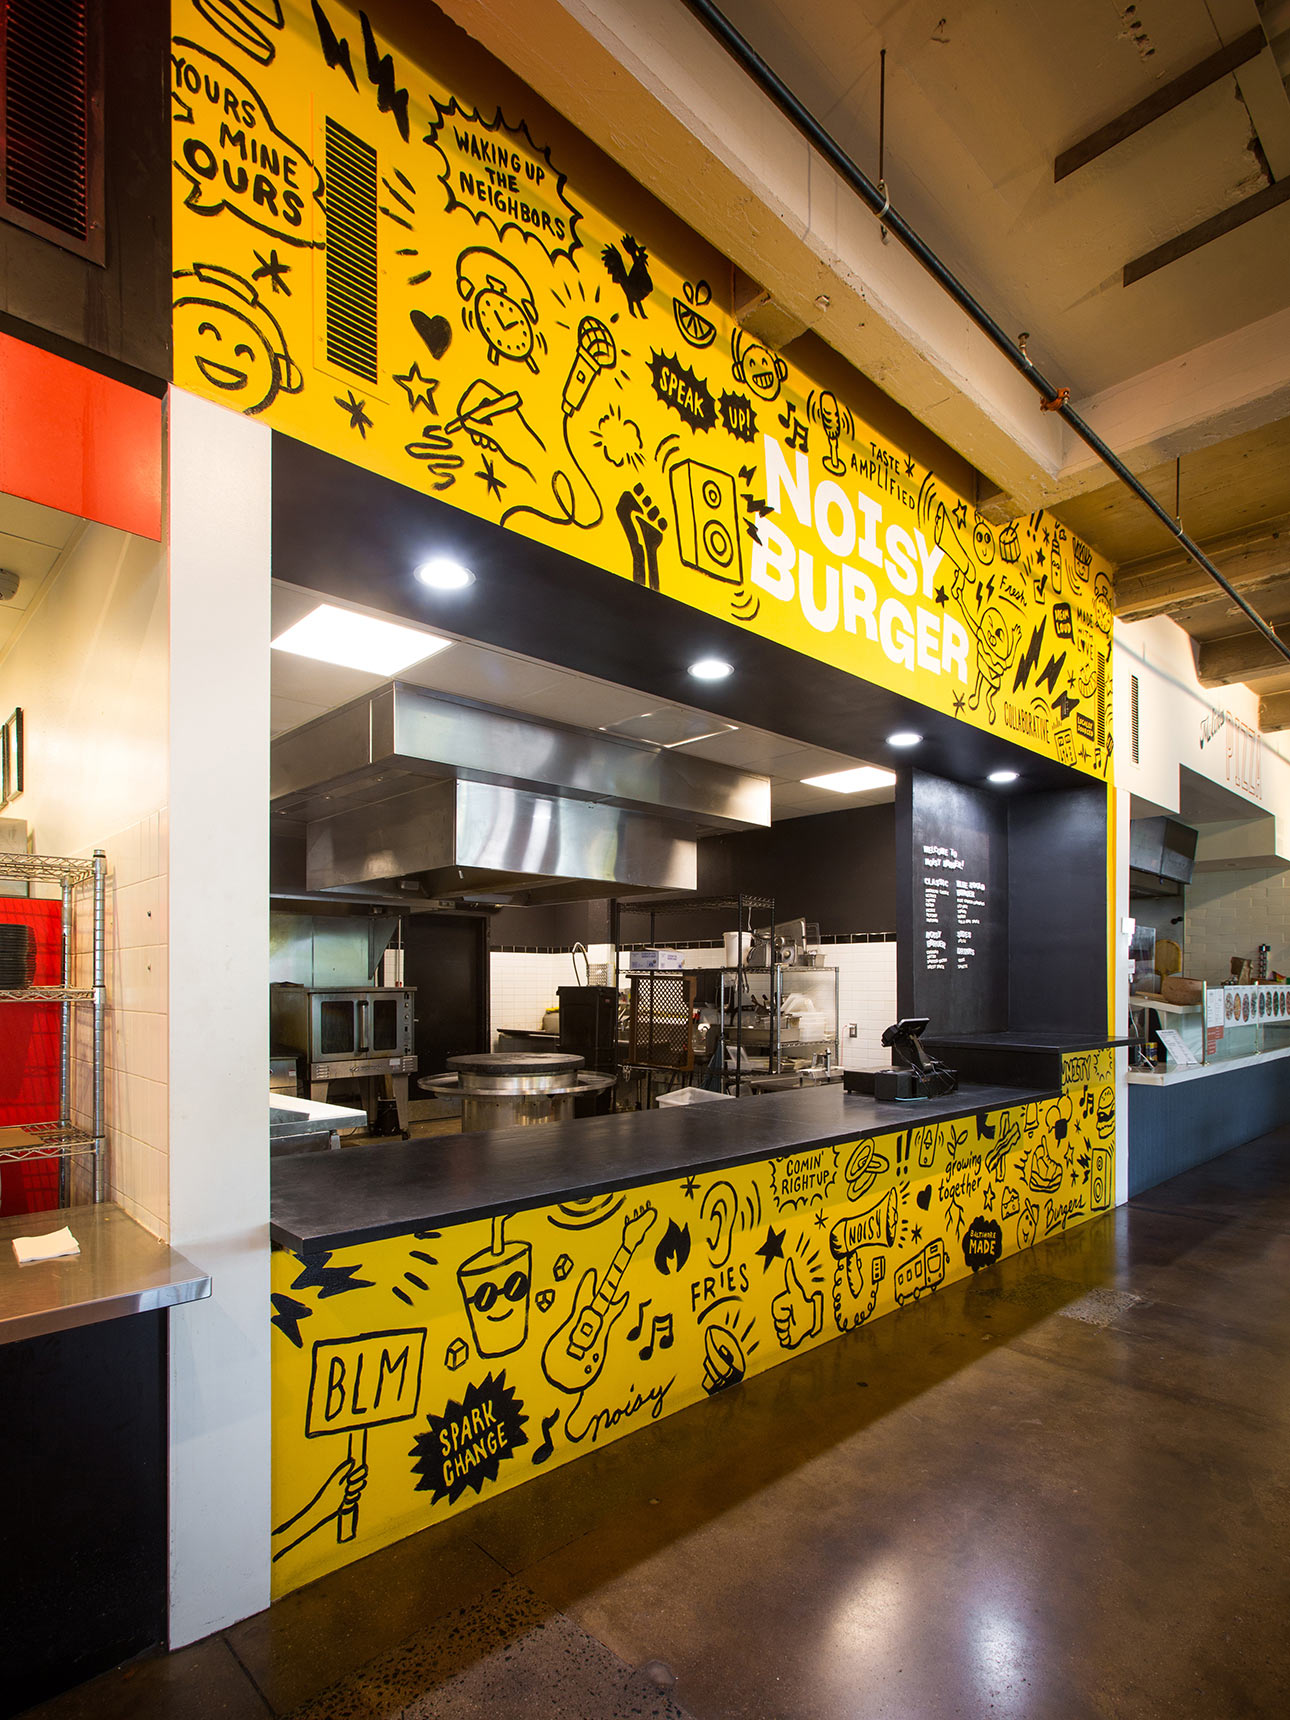 Branding and fast-casual restaurant design for the food stall and carryout counter Noisy Burger, featuring a large yellow mural of fun, energetic doodles.